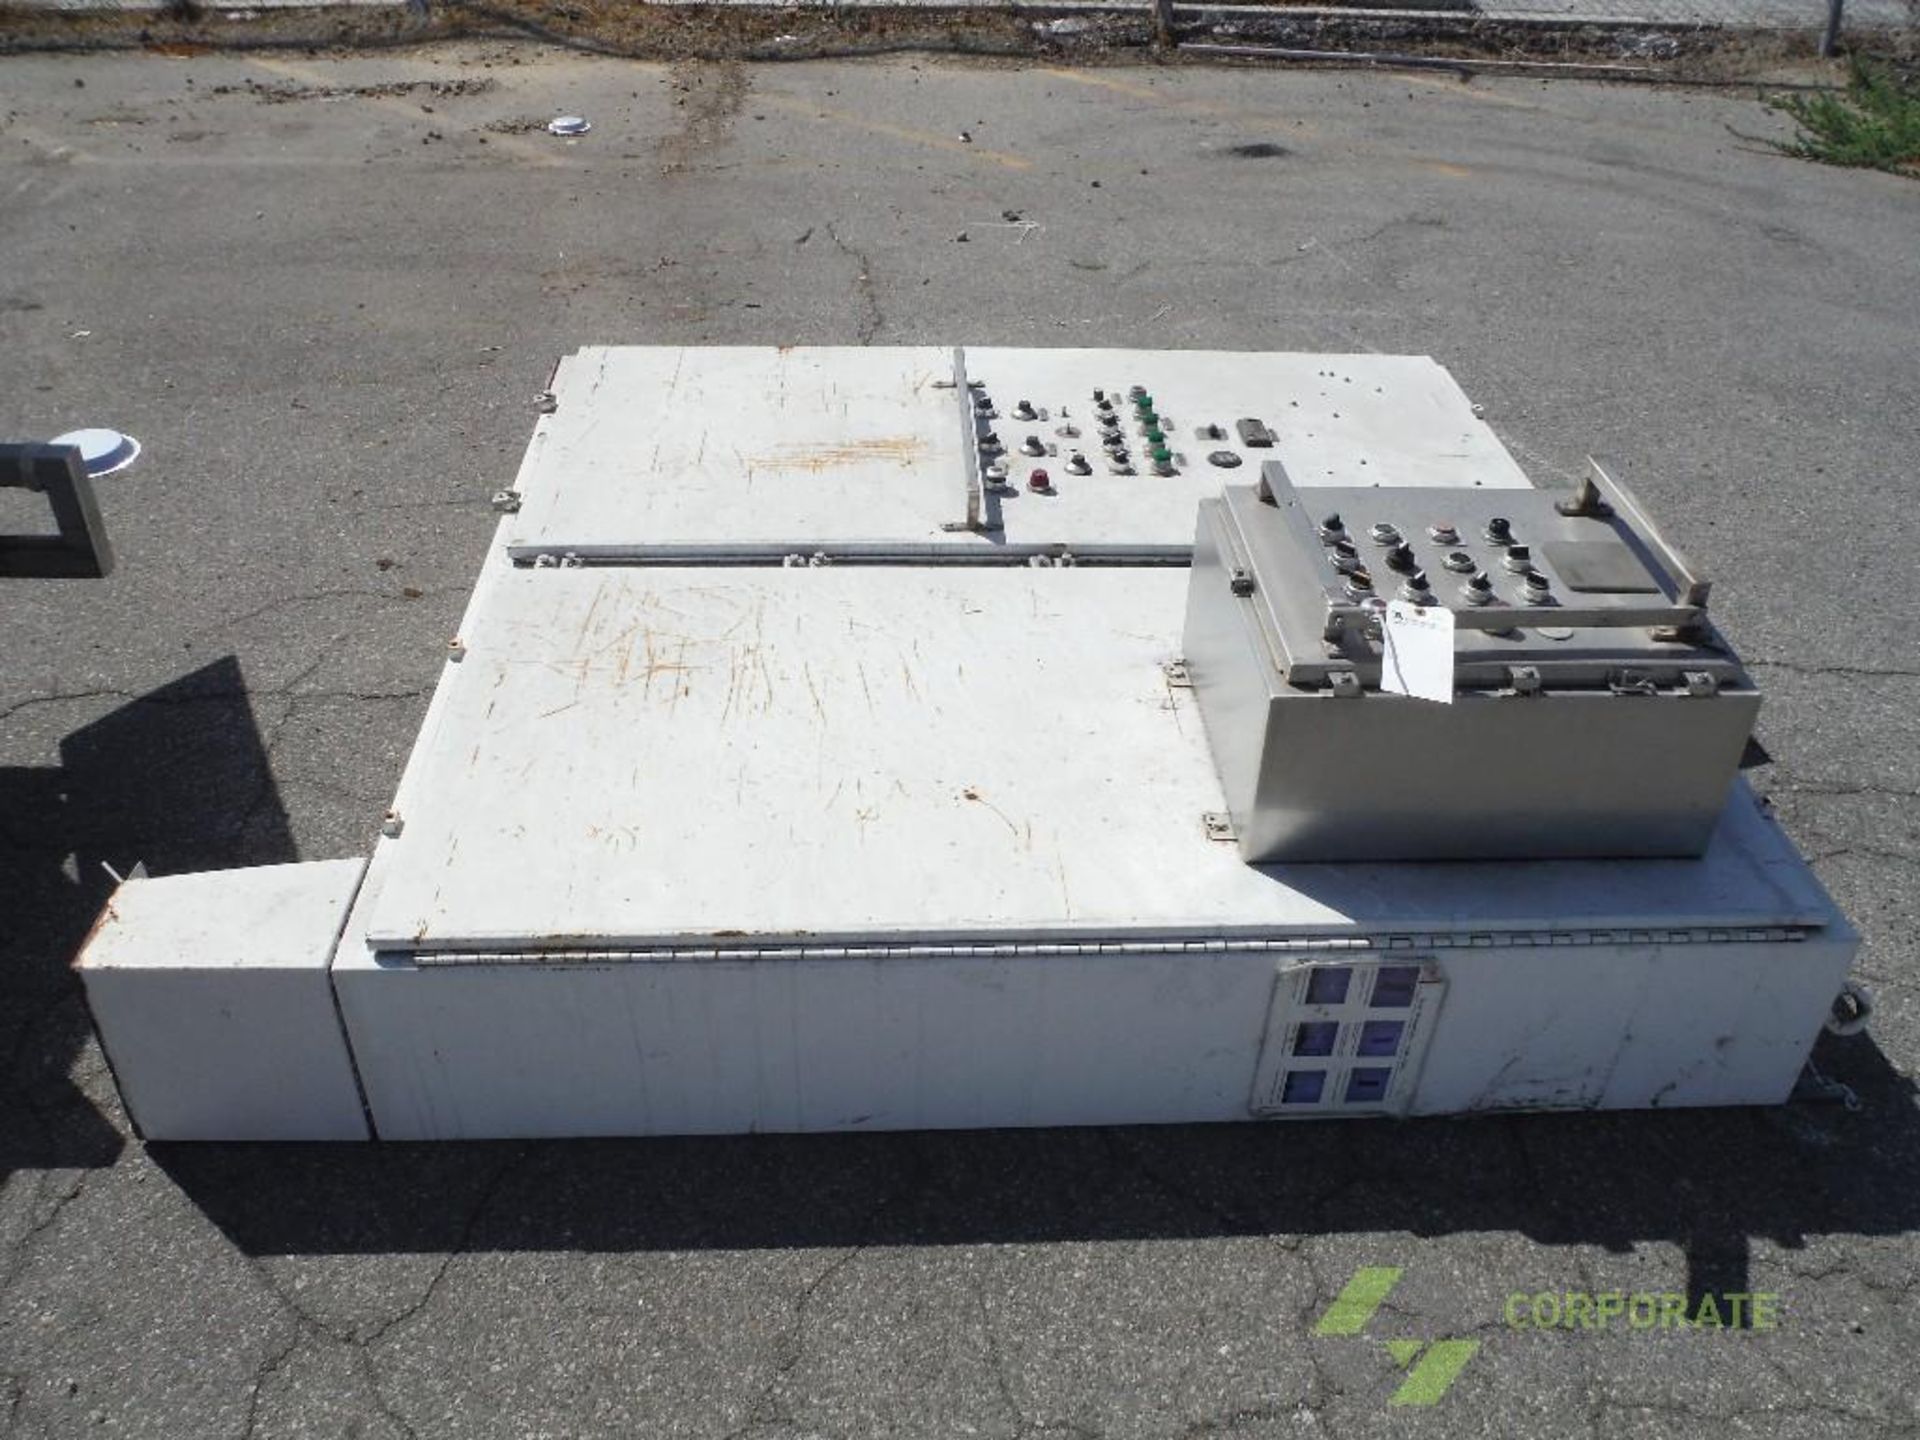 Colborne series 45 pie line, 4,5,6,9,10,11,12 in. pies, removed from facility, stored outdoors, with - Image 15 of 19